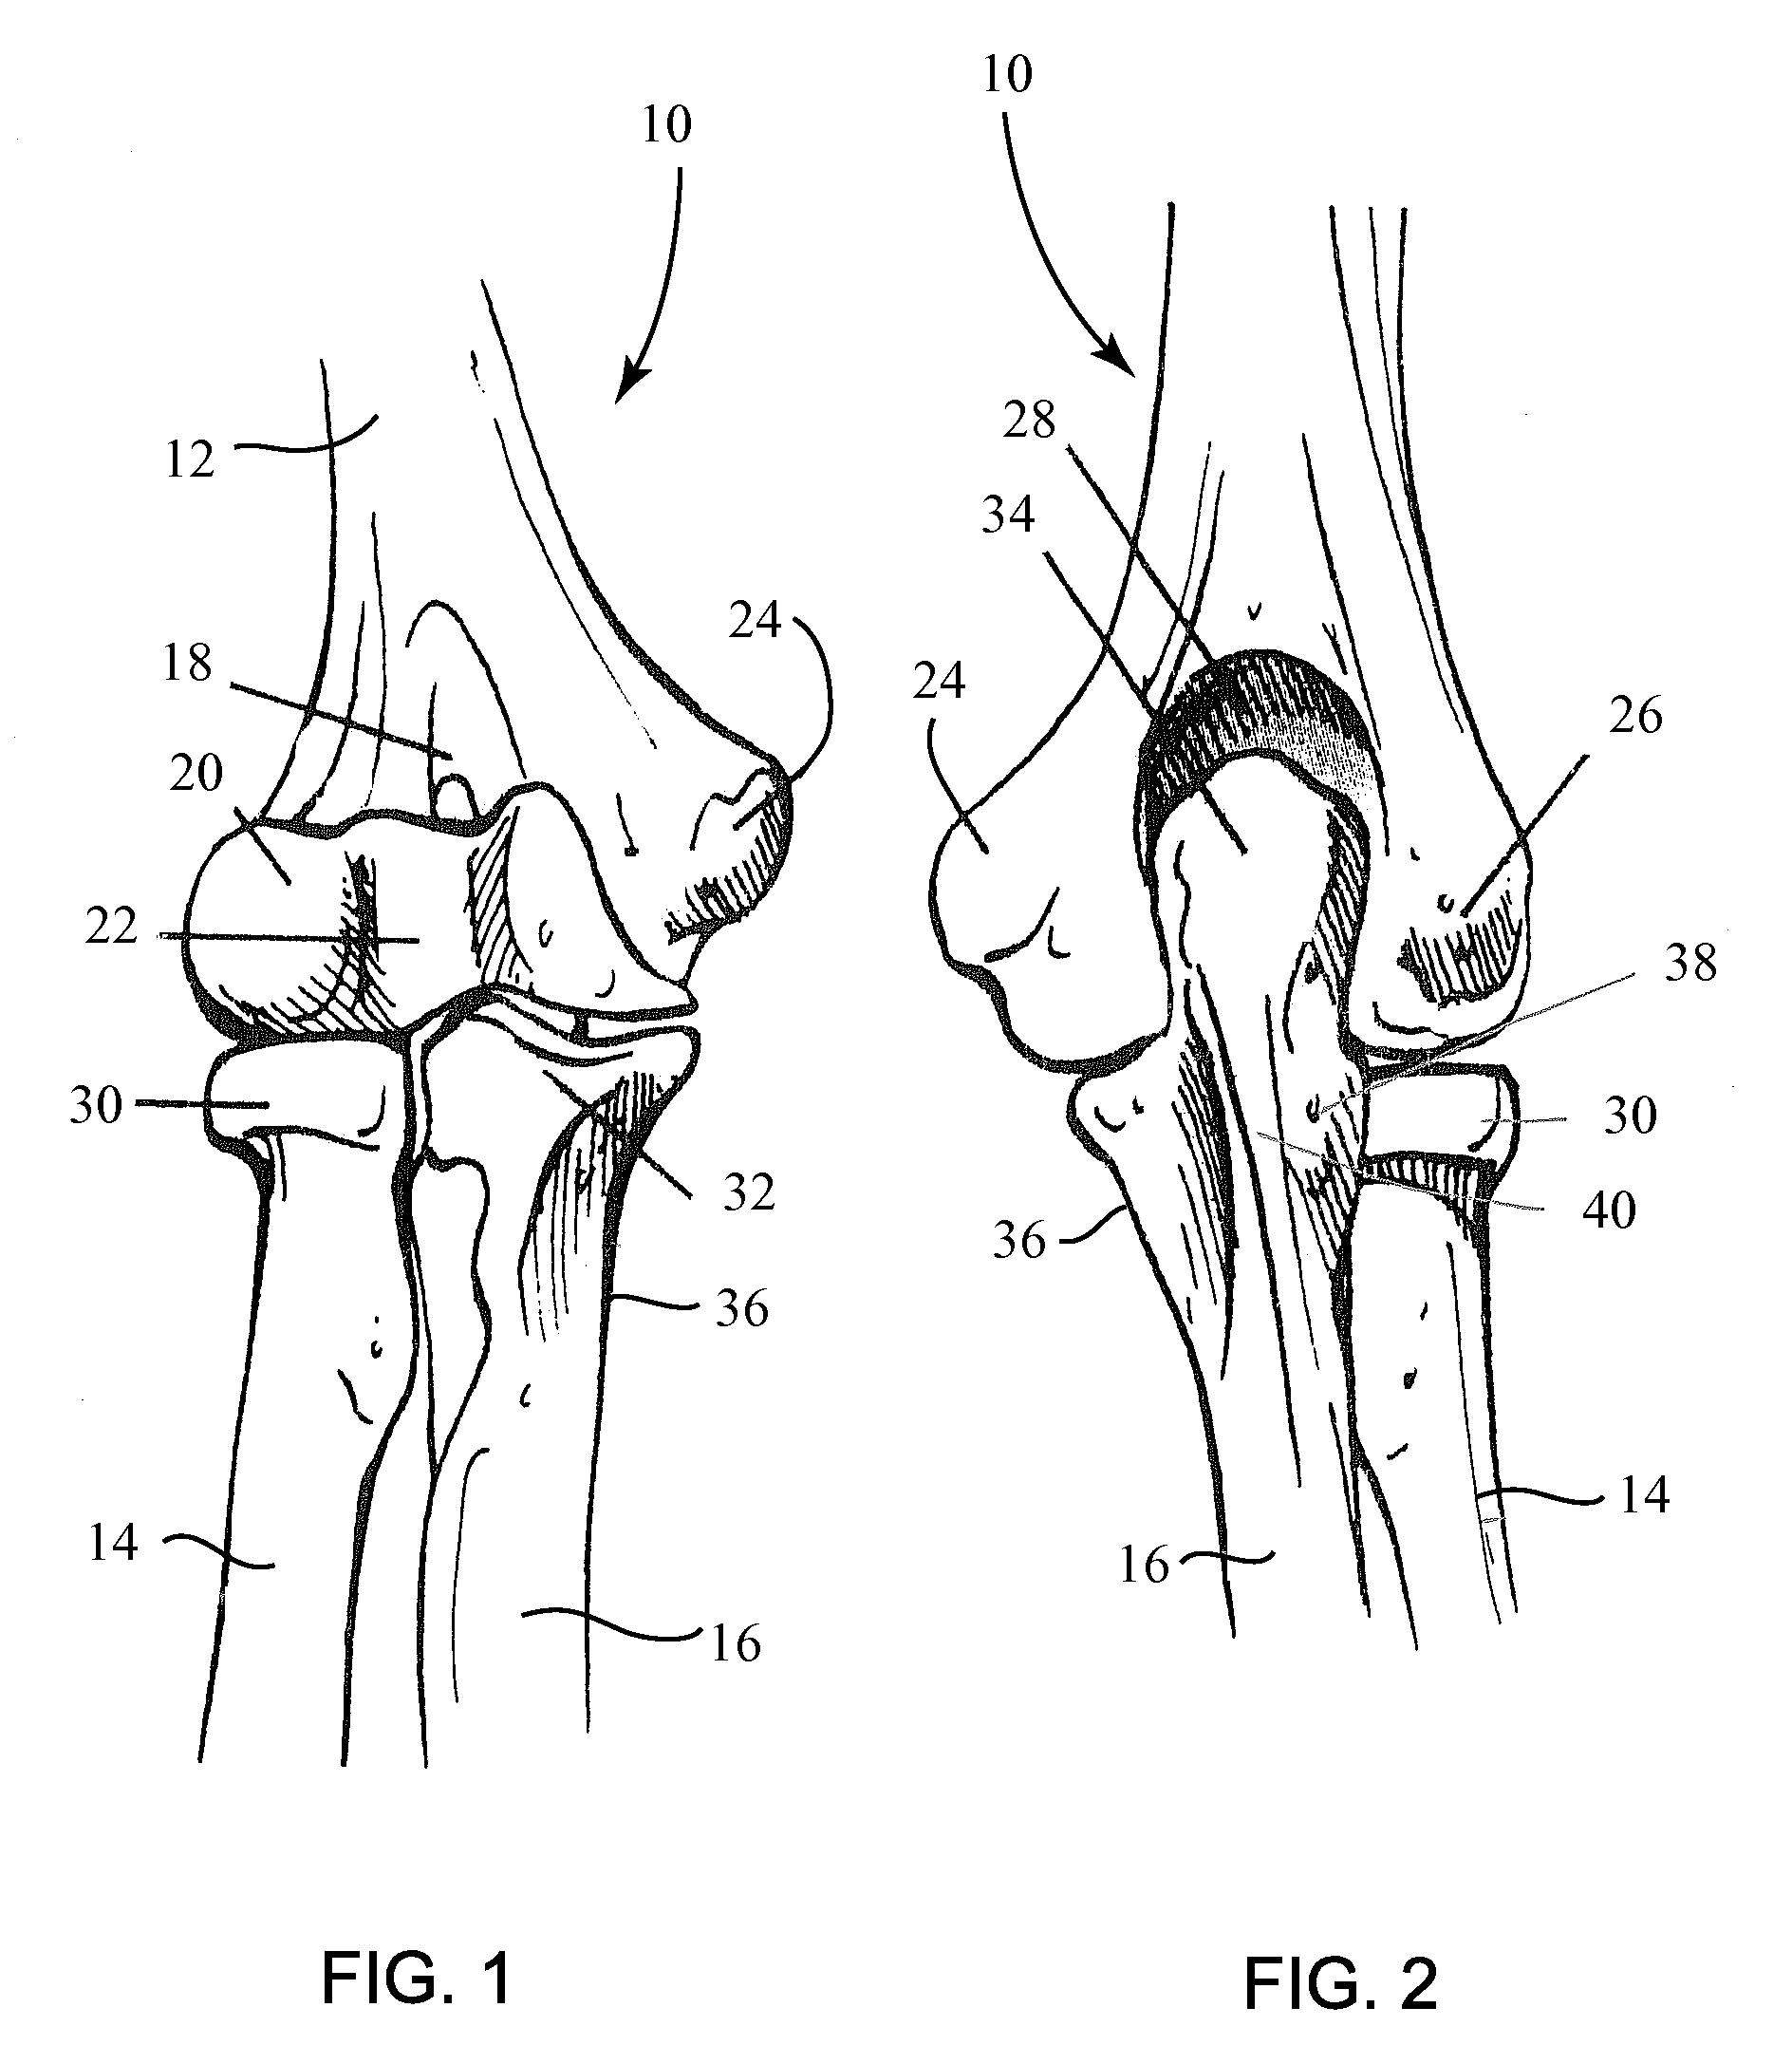 Fracture Fixation Plate for the Proximal Radius